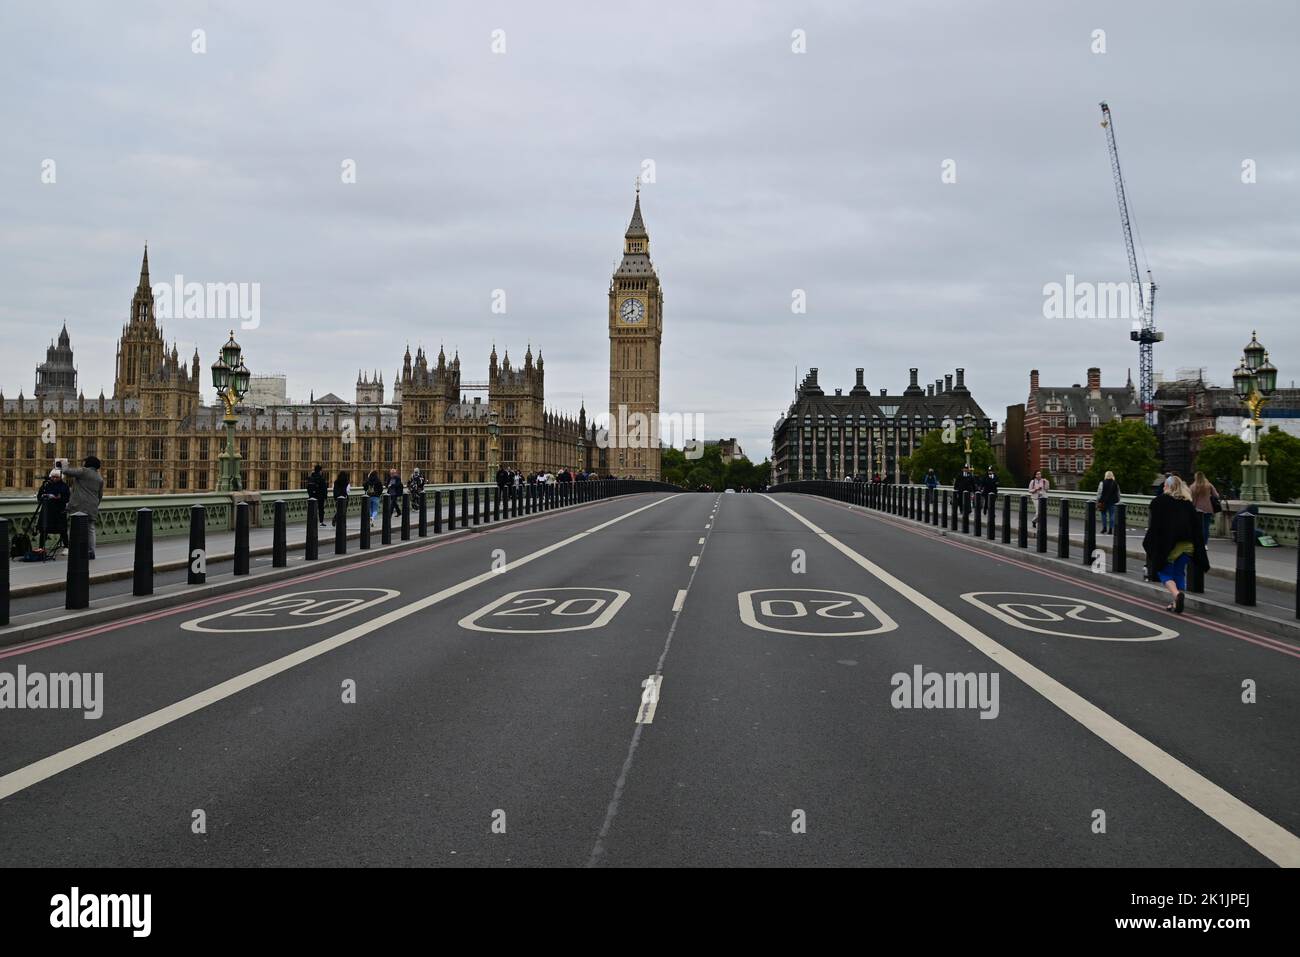 State funeral of Her Majesty Queen Elizabeth II, London, UK, Monday 19th September 2022. Westminster Bridge is closed to traffic in preparation for the ceremony. Stock Photo